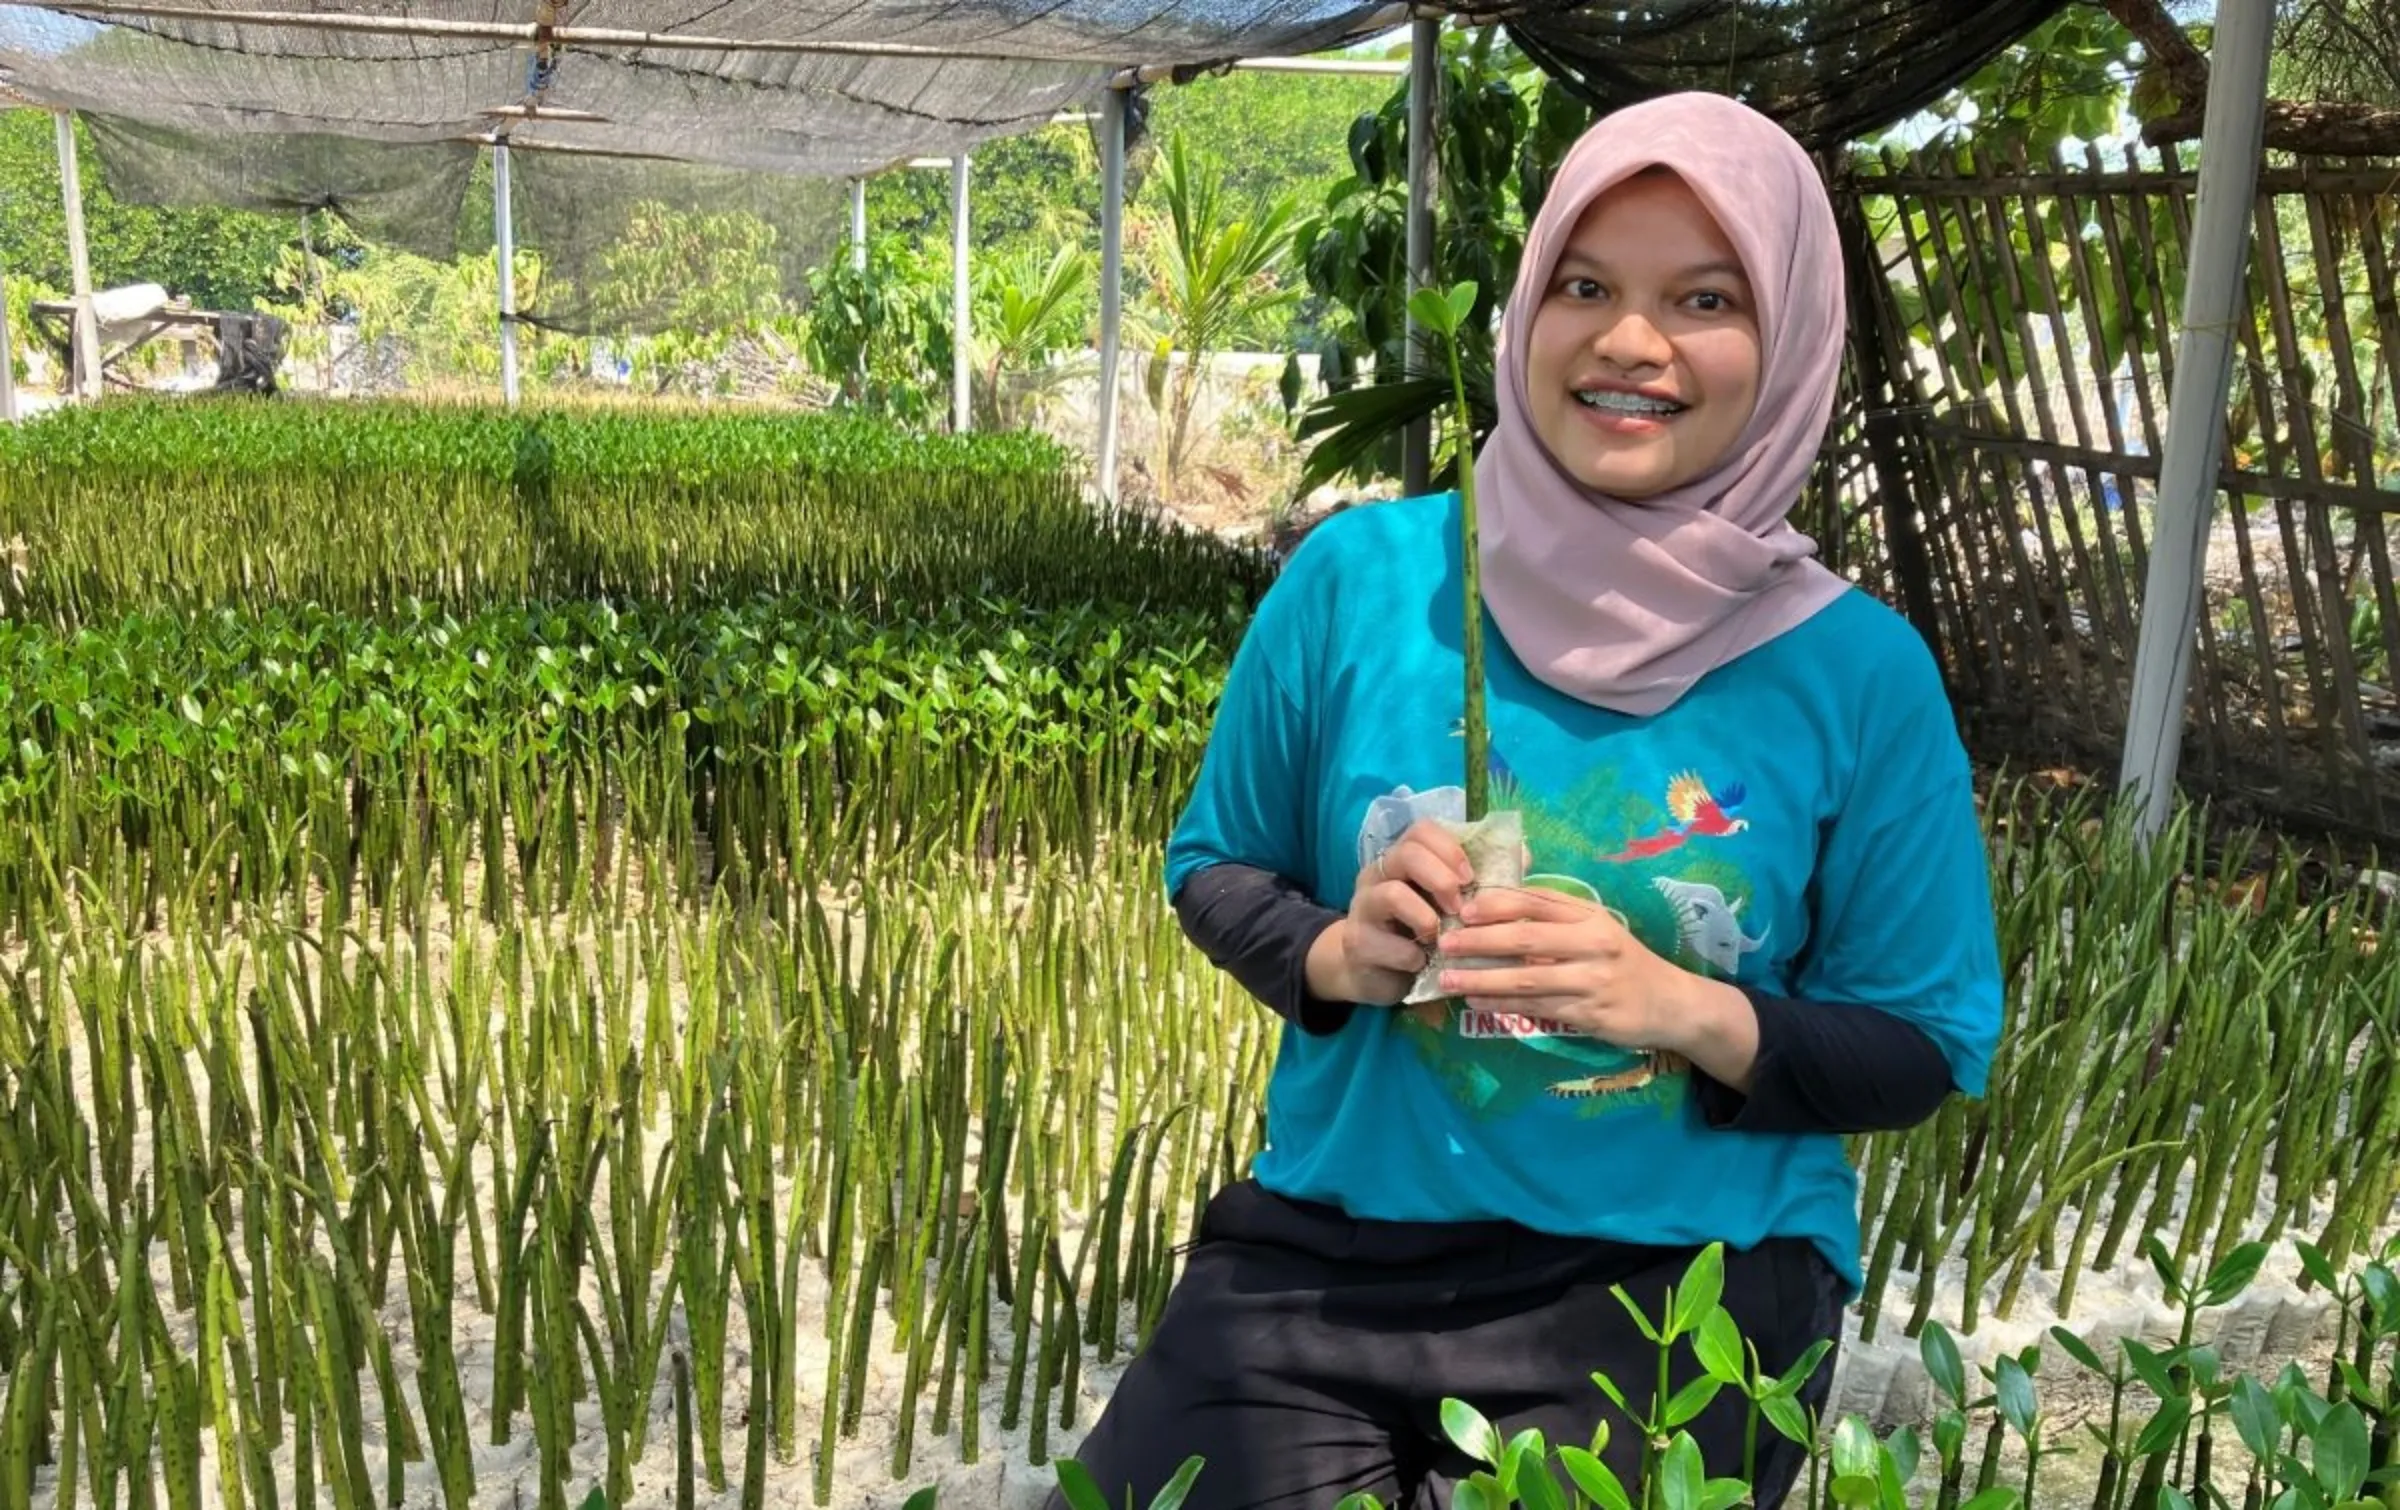 Jakarta resident and Hutan Itu Indonesia volunteer Dwi Bangun at a mangroves planting project along the coastal areas of Harapan island, north of Jakarta, Indonesia on August 10, 2023